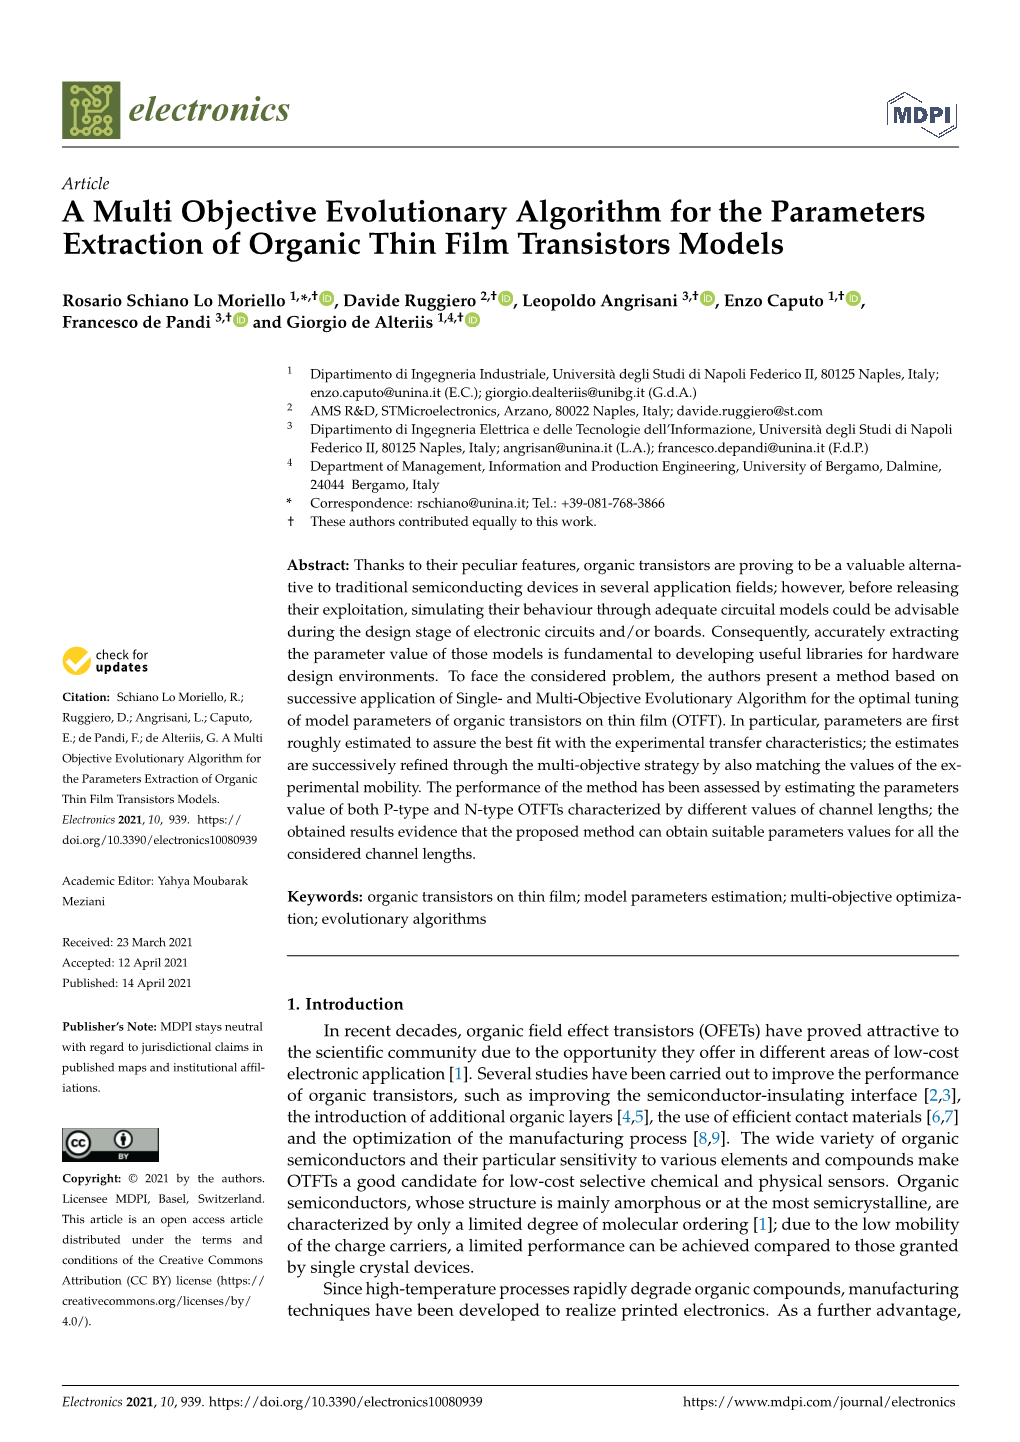 A Multi Objective Evolutionary Algorithm for the Parameters Extraction of Organic Thin Film Transistors Models